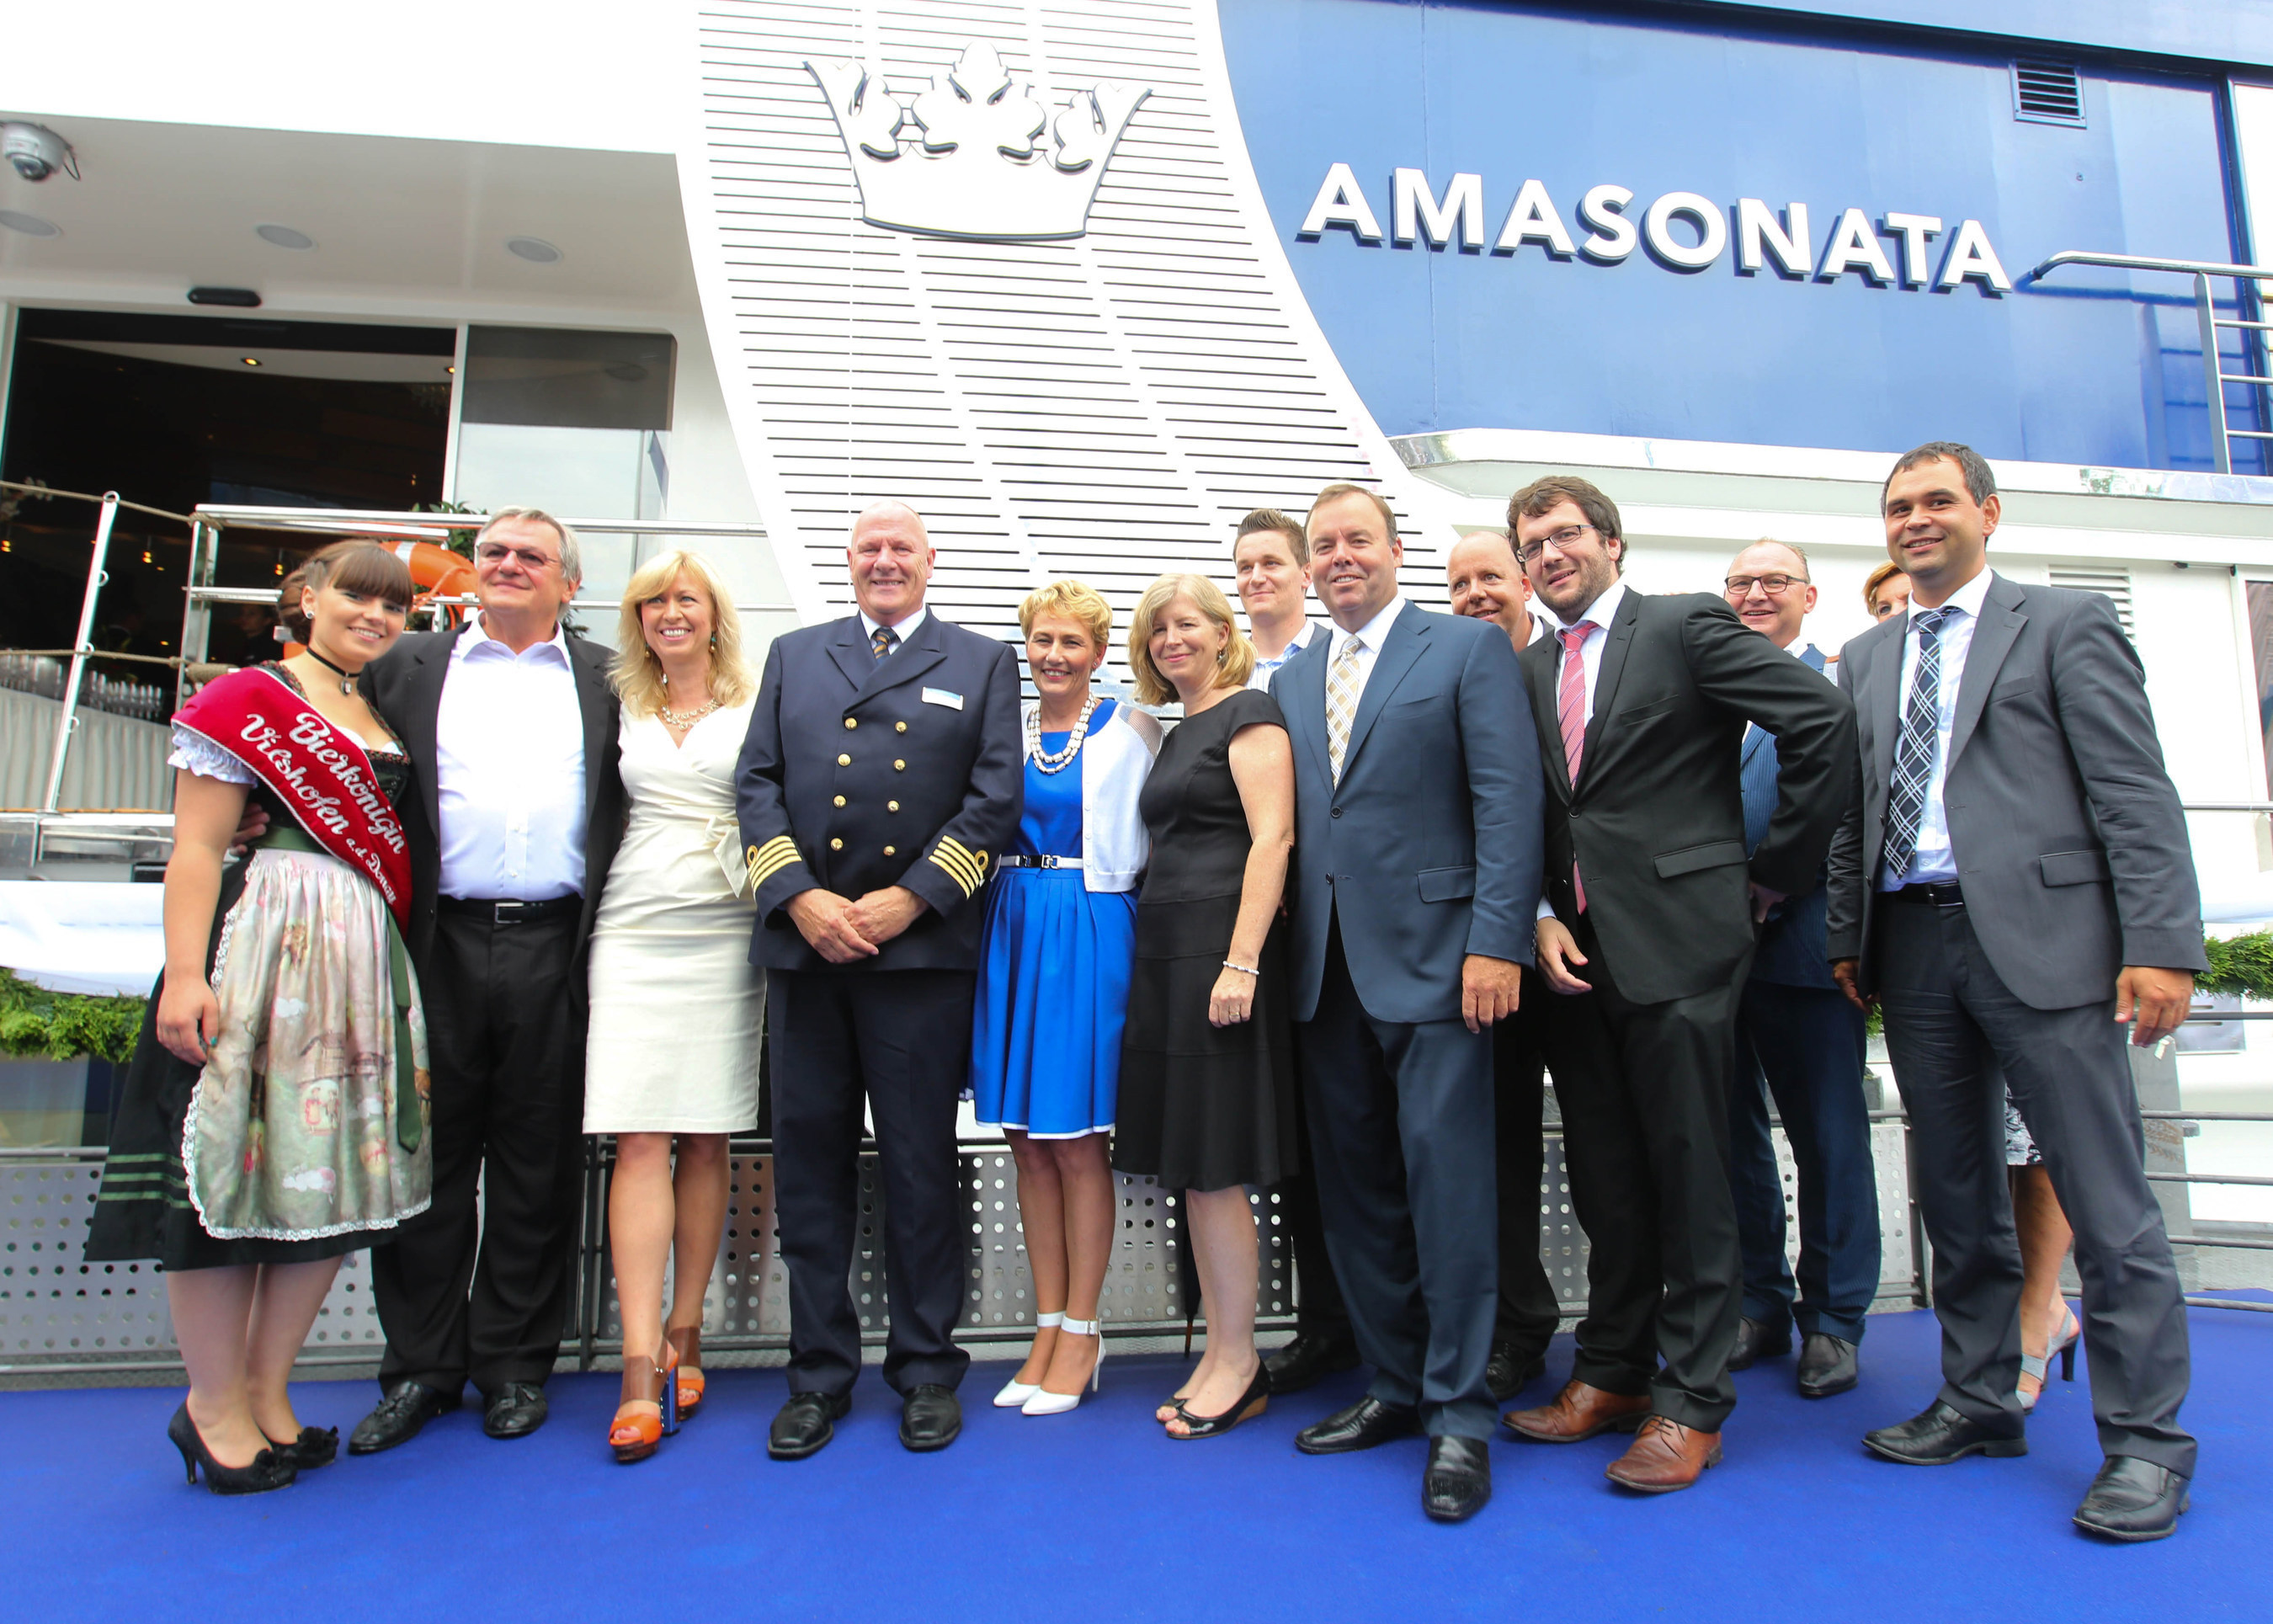 The captain, Godmother and AmaWaterways executives joined the Queen of Vilshofen and town's mayor at the AmaSonata christening. (PRNewsFoto/AmaWaterways)